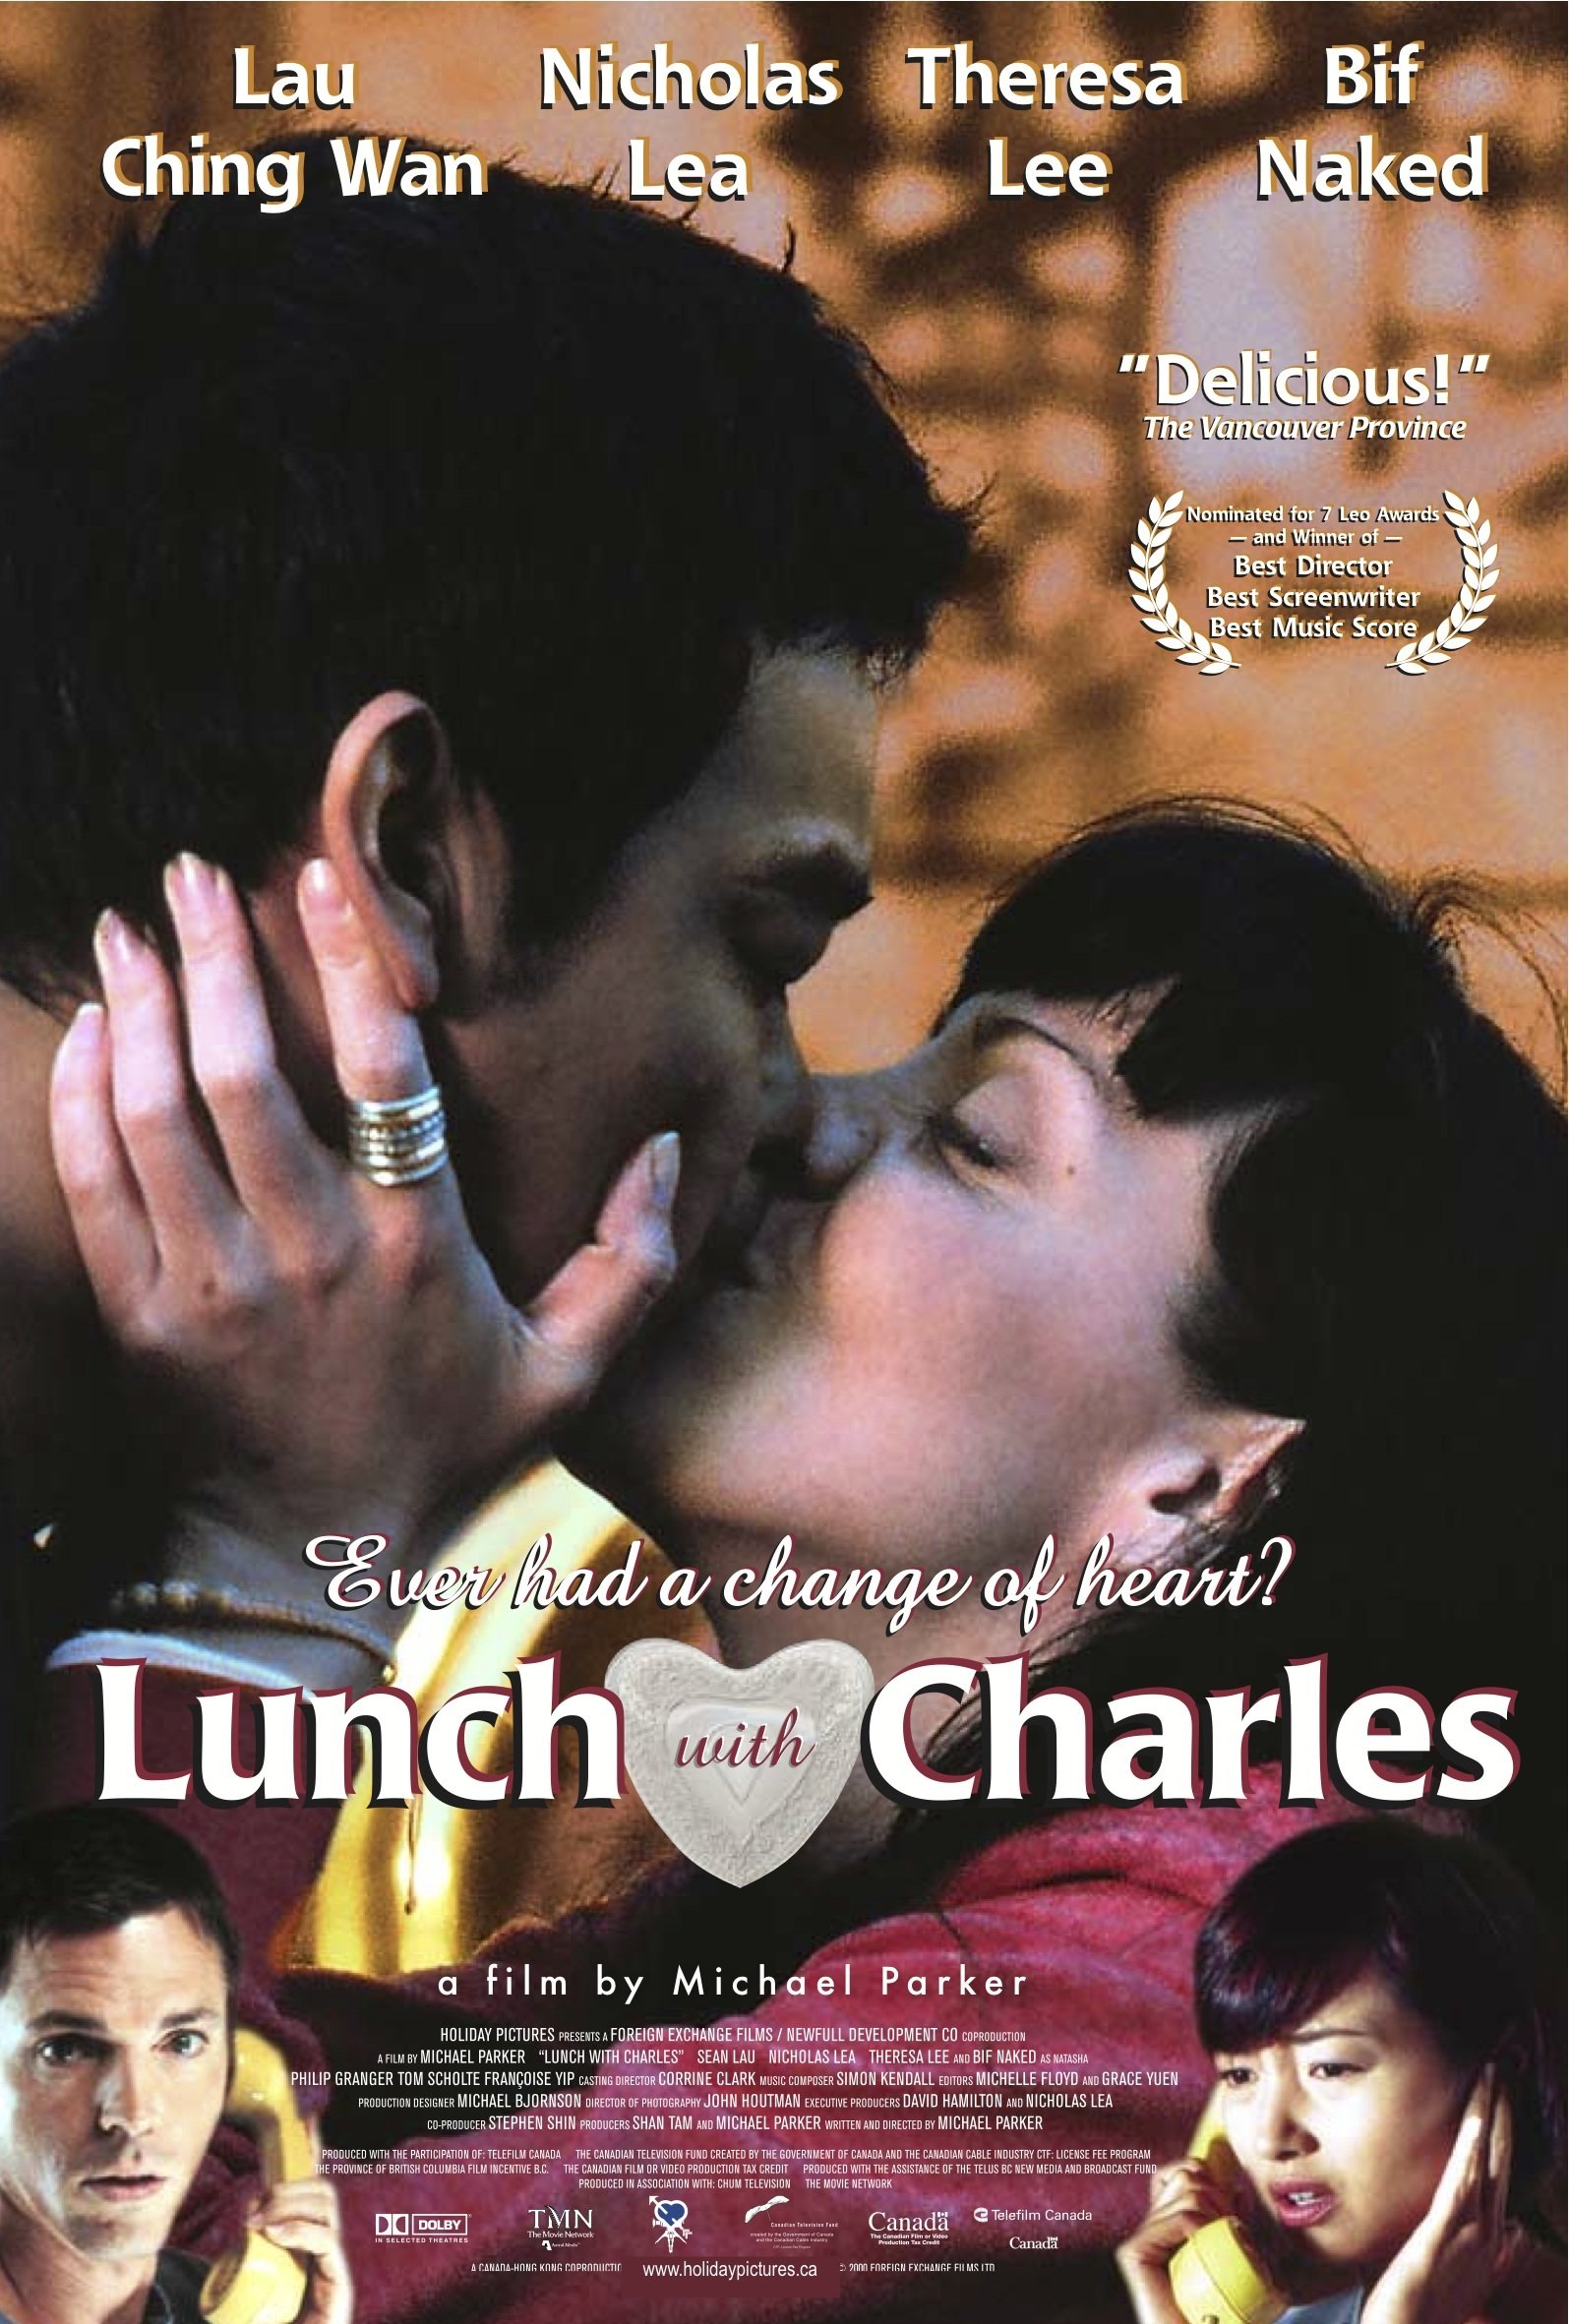 Ching Wan Lau, Nicholas Lea, Theresa Lee and Bif Naked in Lunch with Charles (2001)